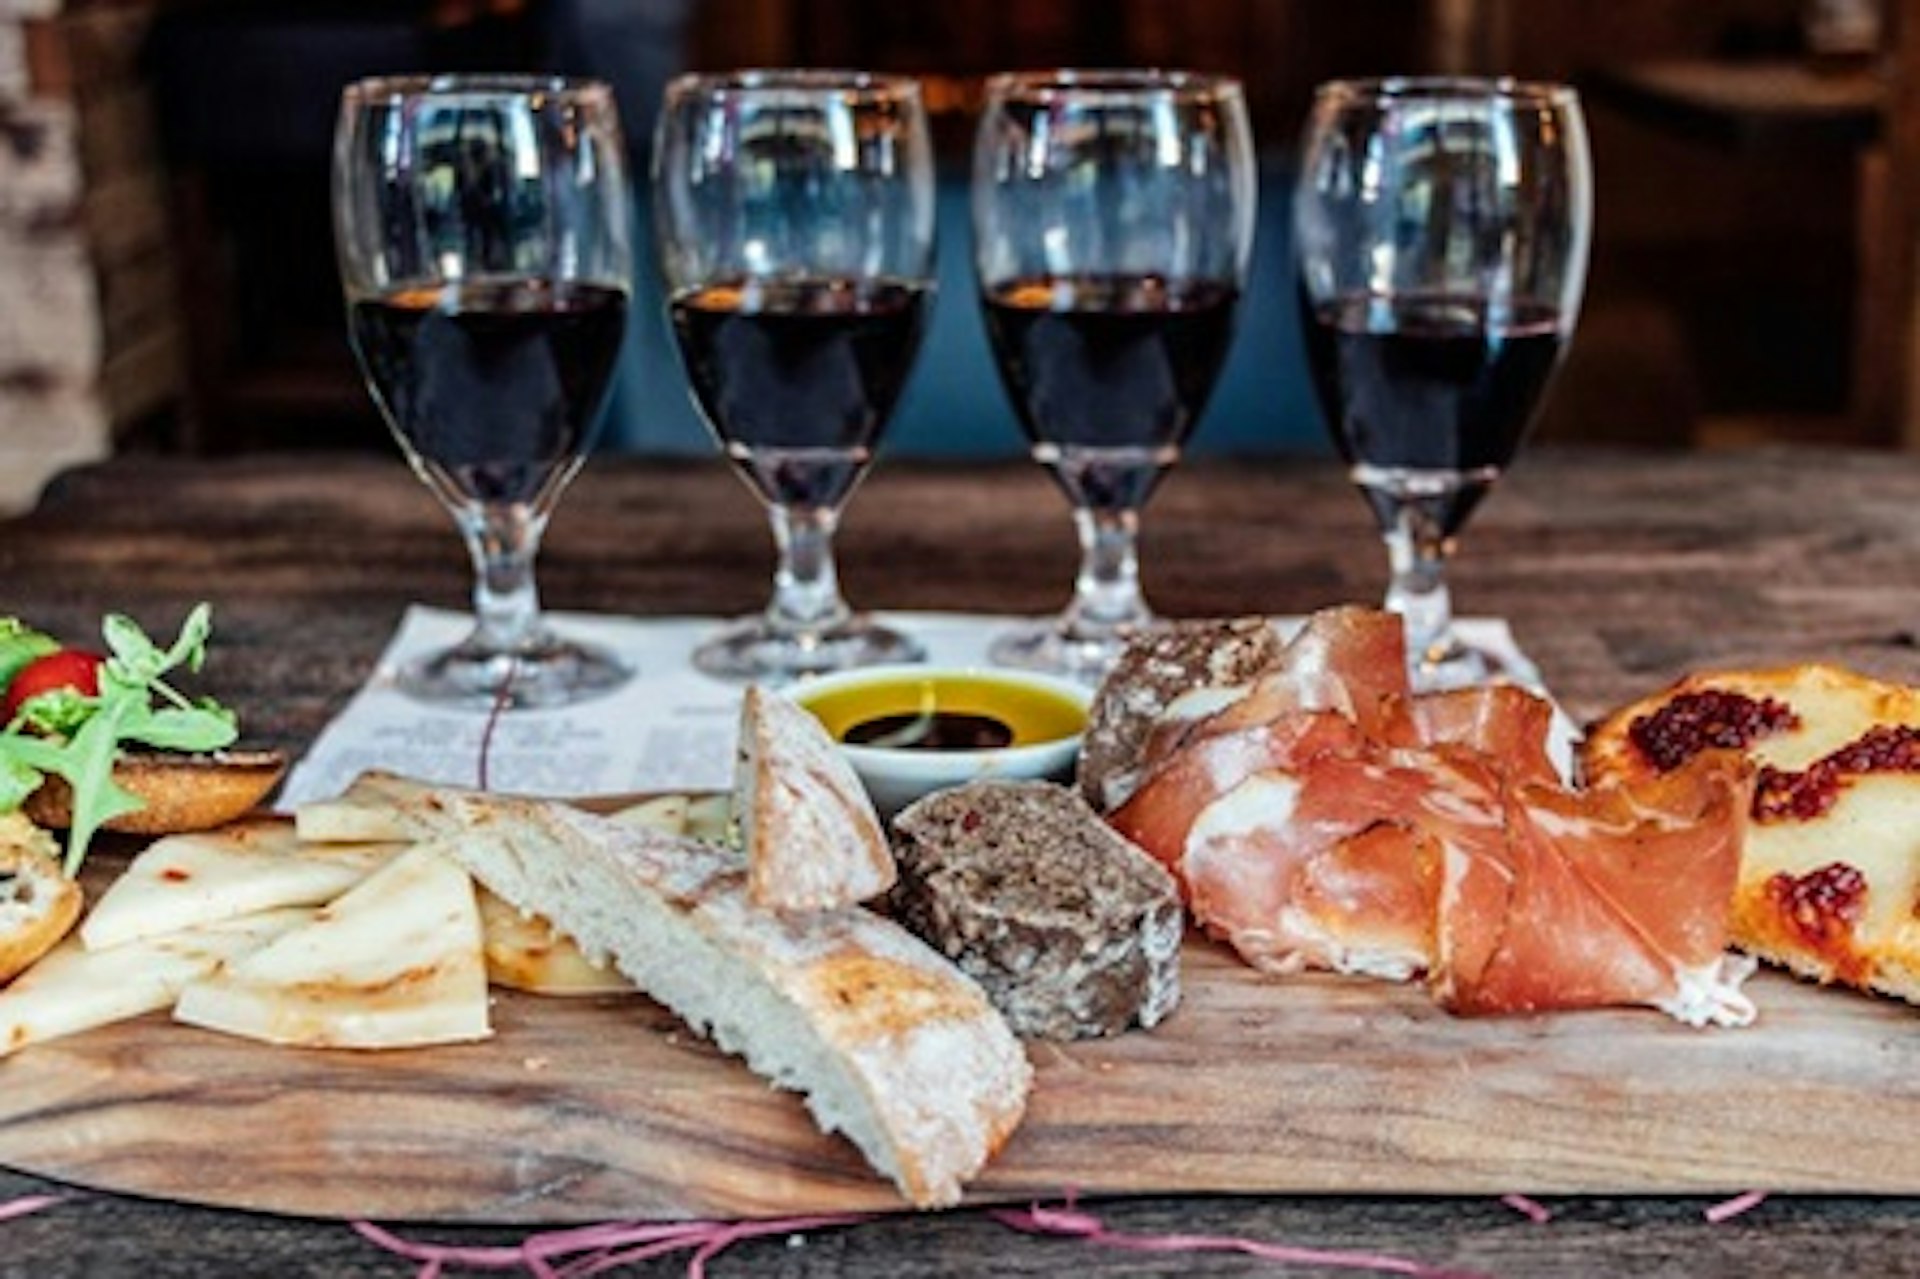 Italian Food and Red Wine Pairings for Two at Veeno